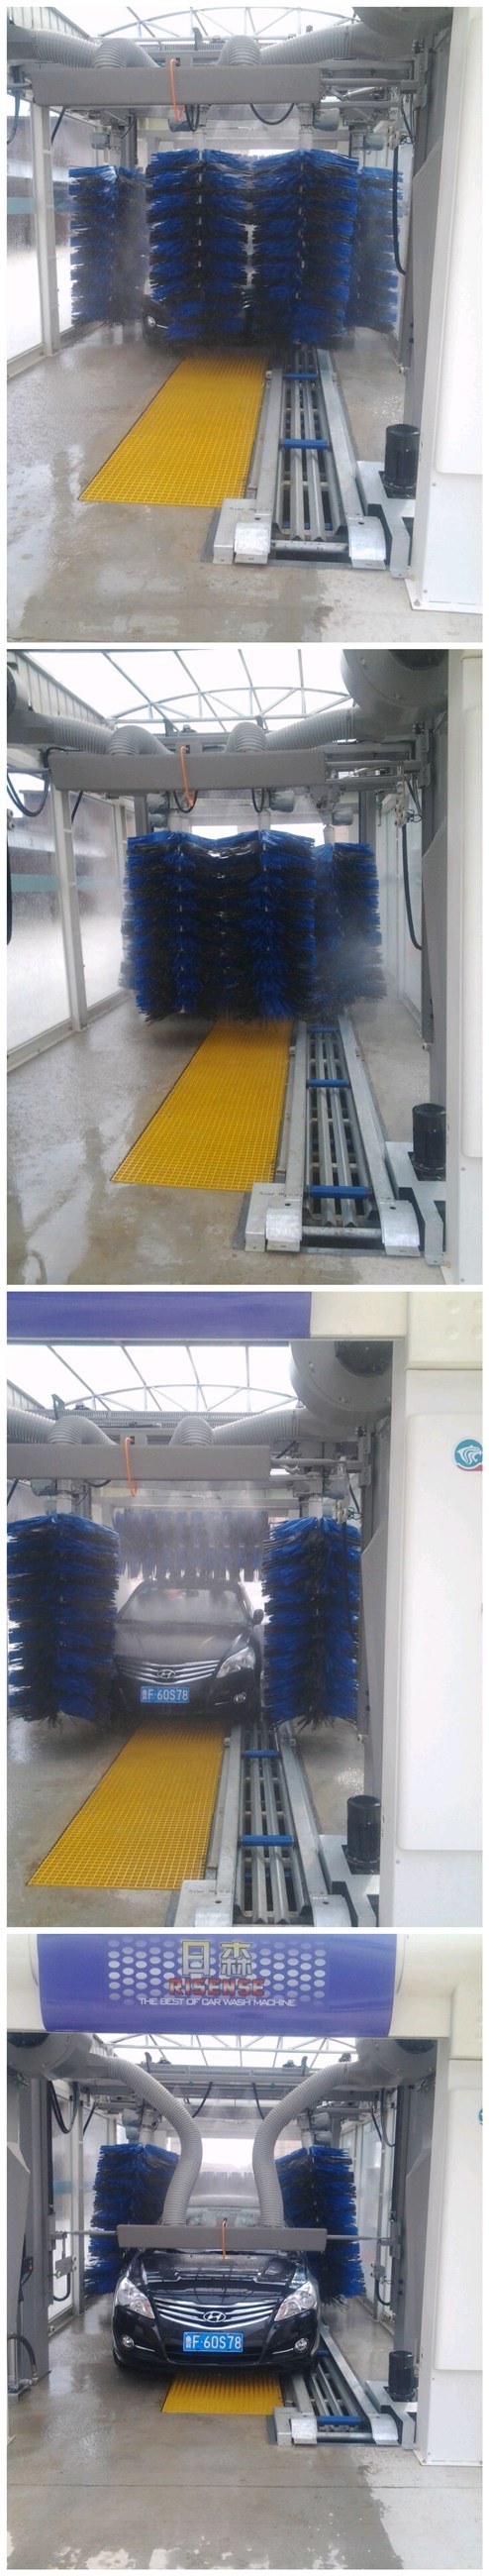 Best Price Chile Car Wash Business Automatic Car Washing Equipment